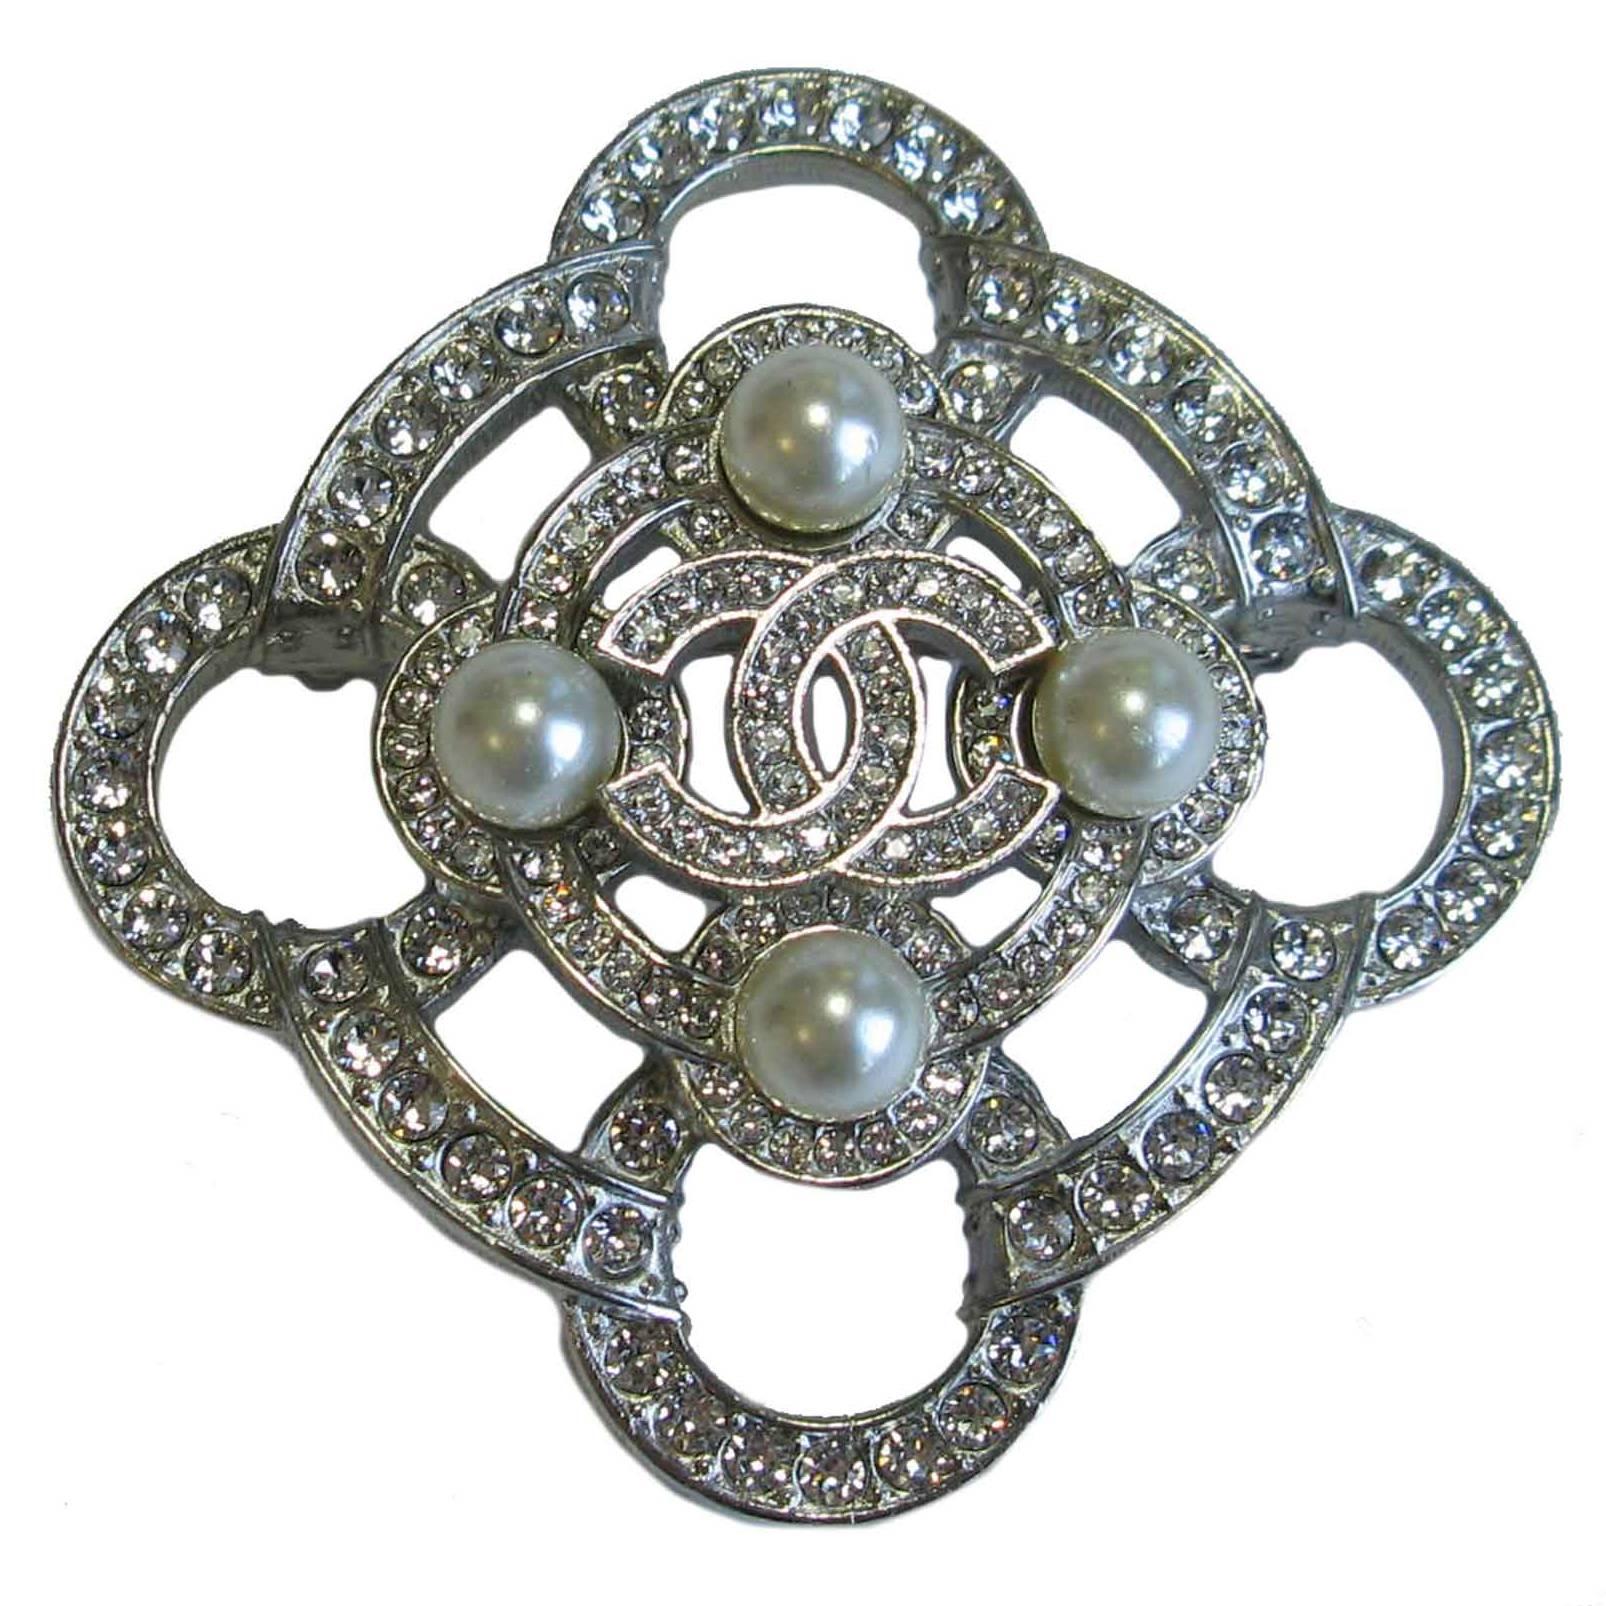 Chanel Silver Tone Metal with Rhinestones and Glass Pearls Brooch